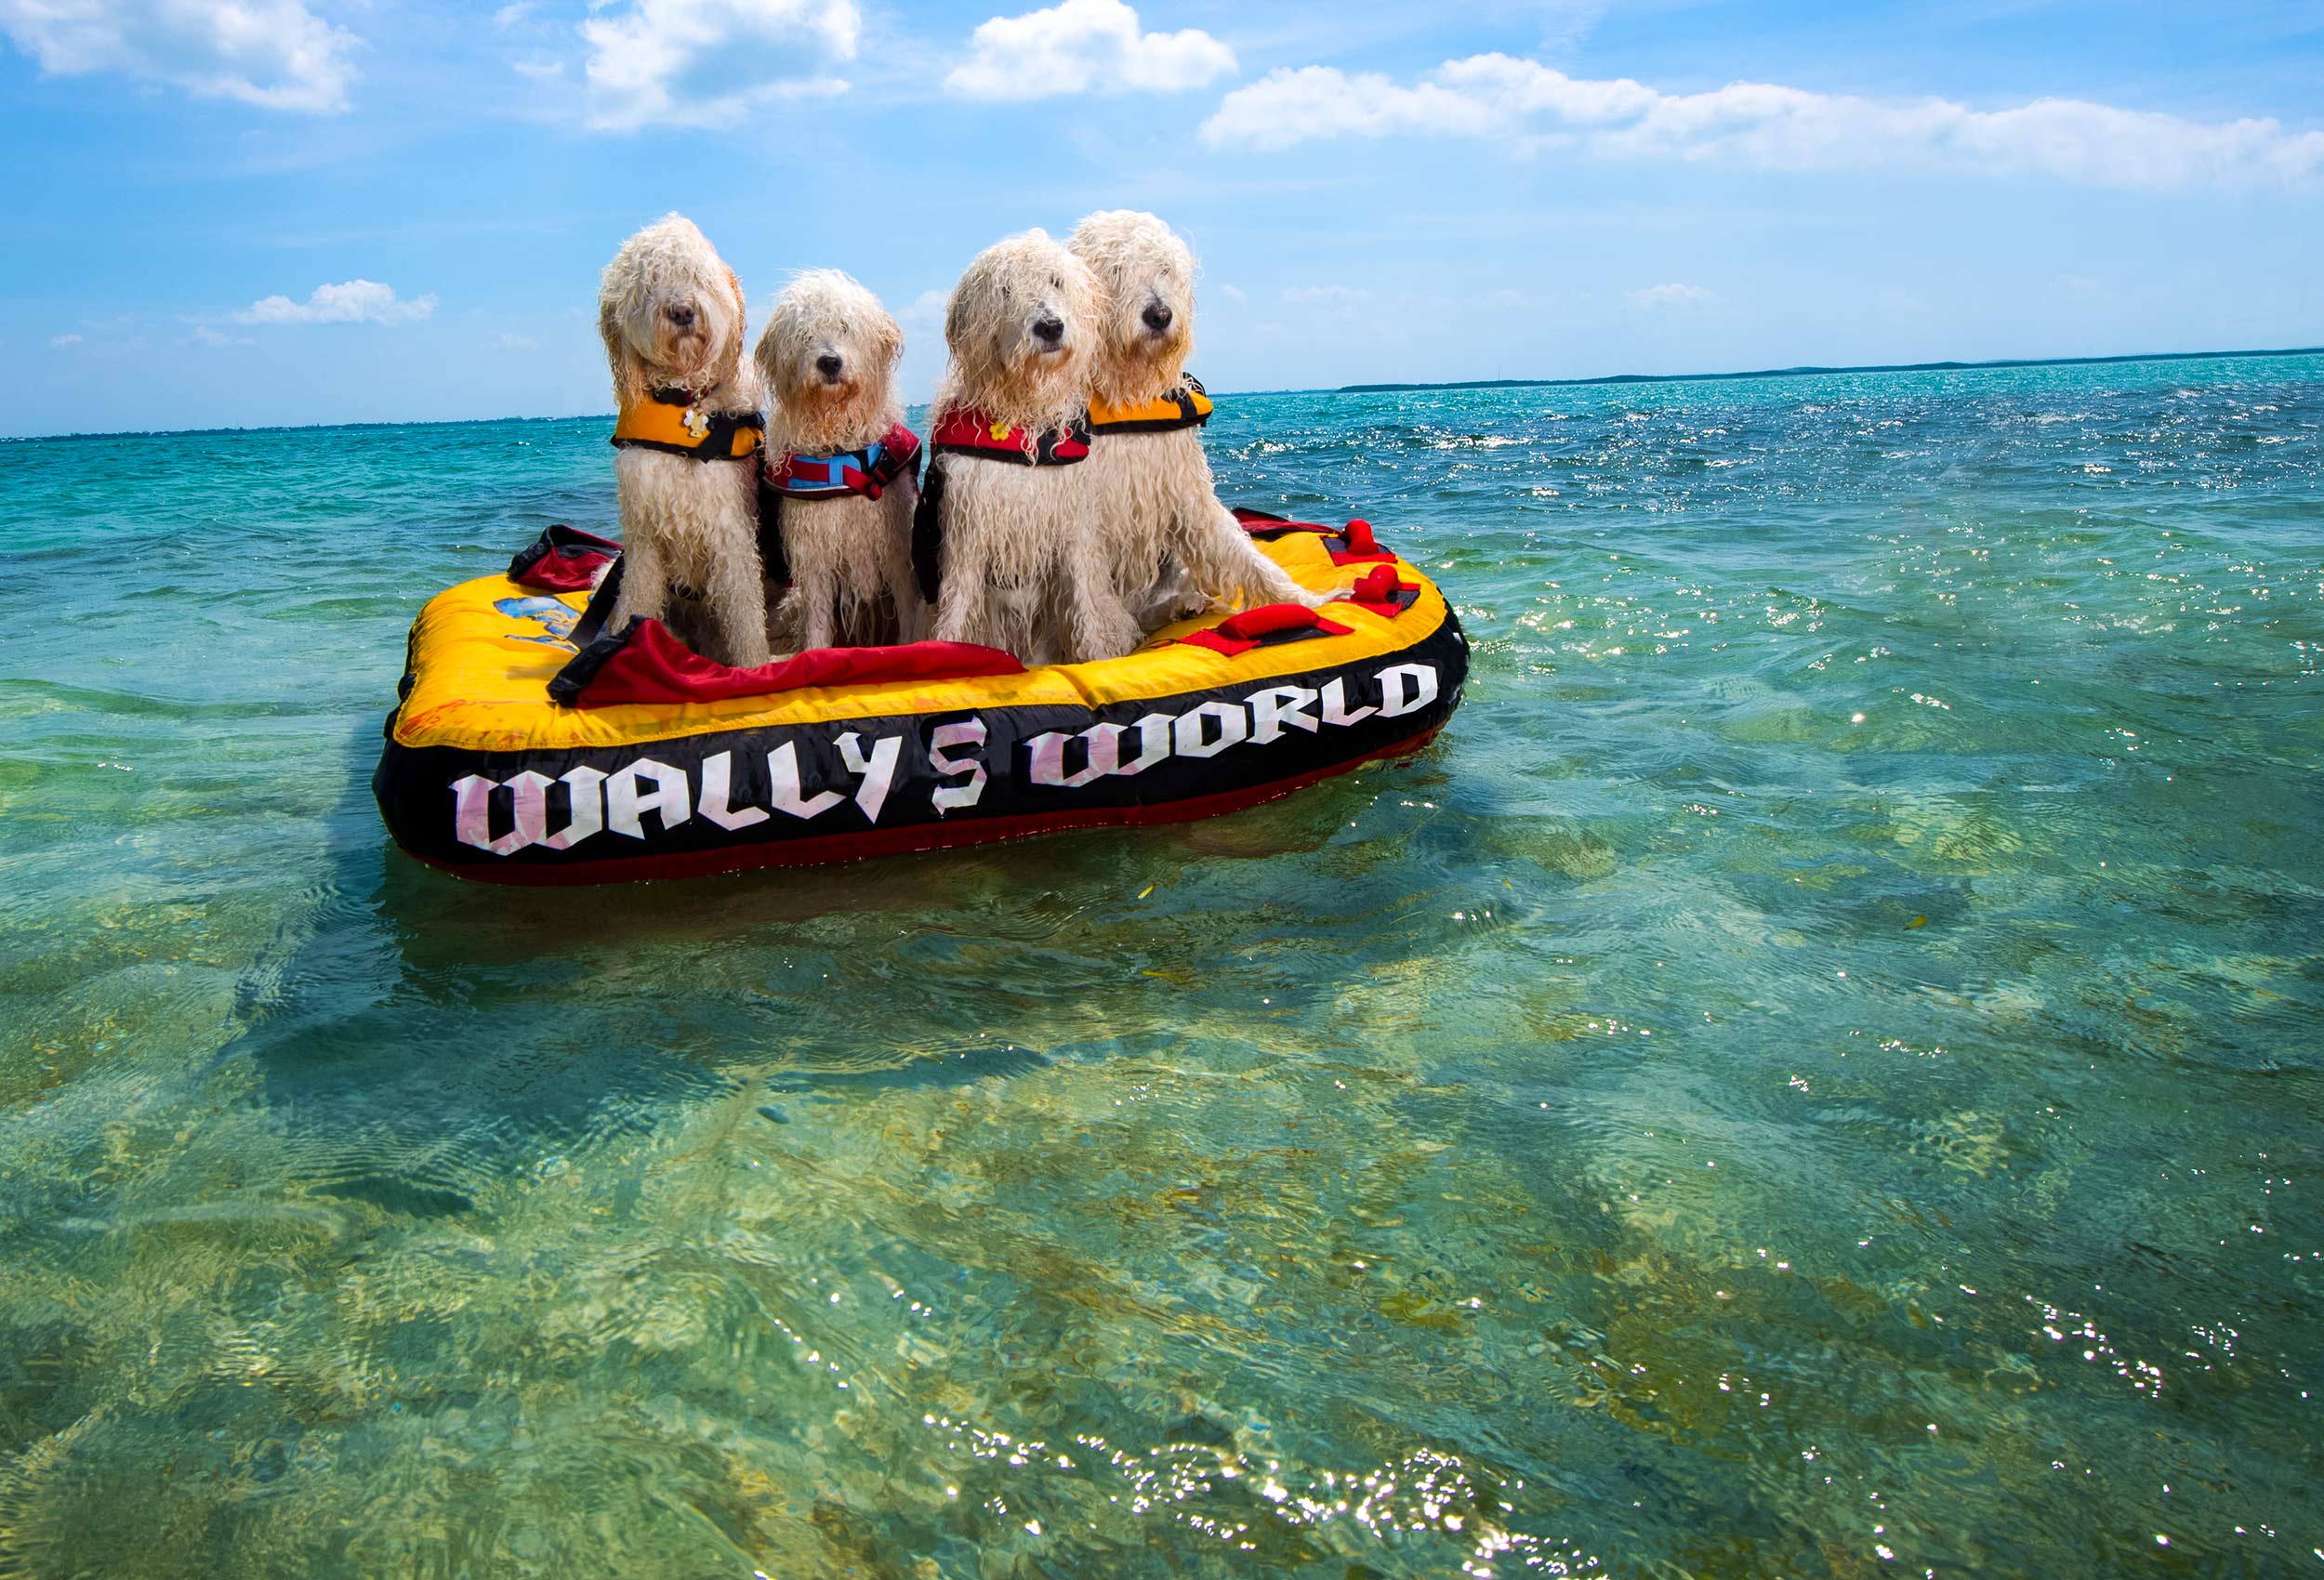 Four Goldendoodles float on raft in clear blue water in the Florida Keys